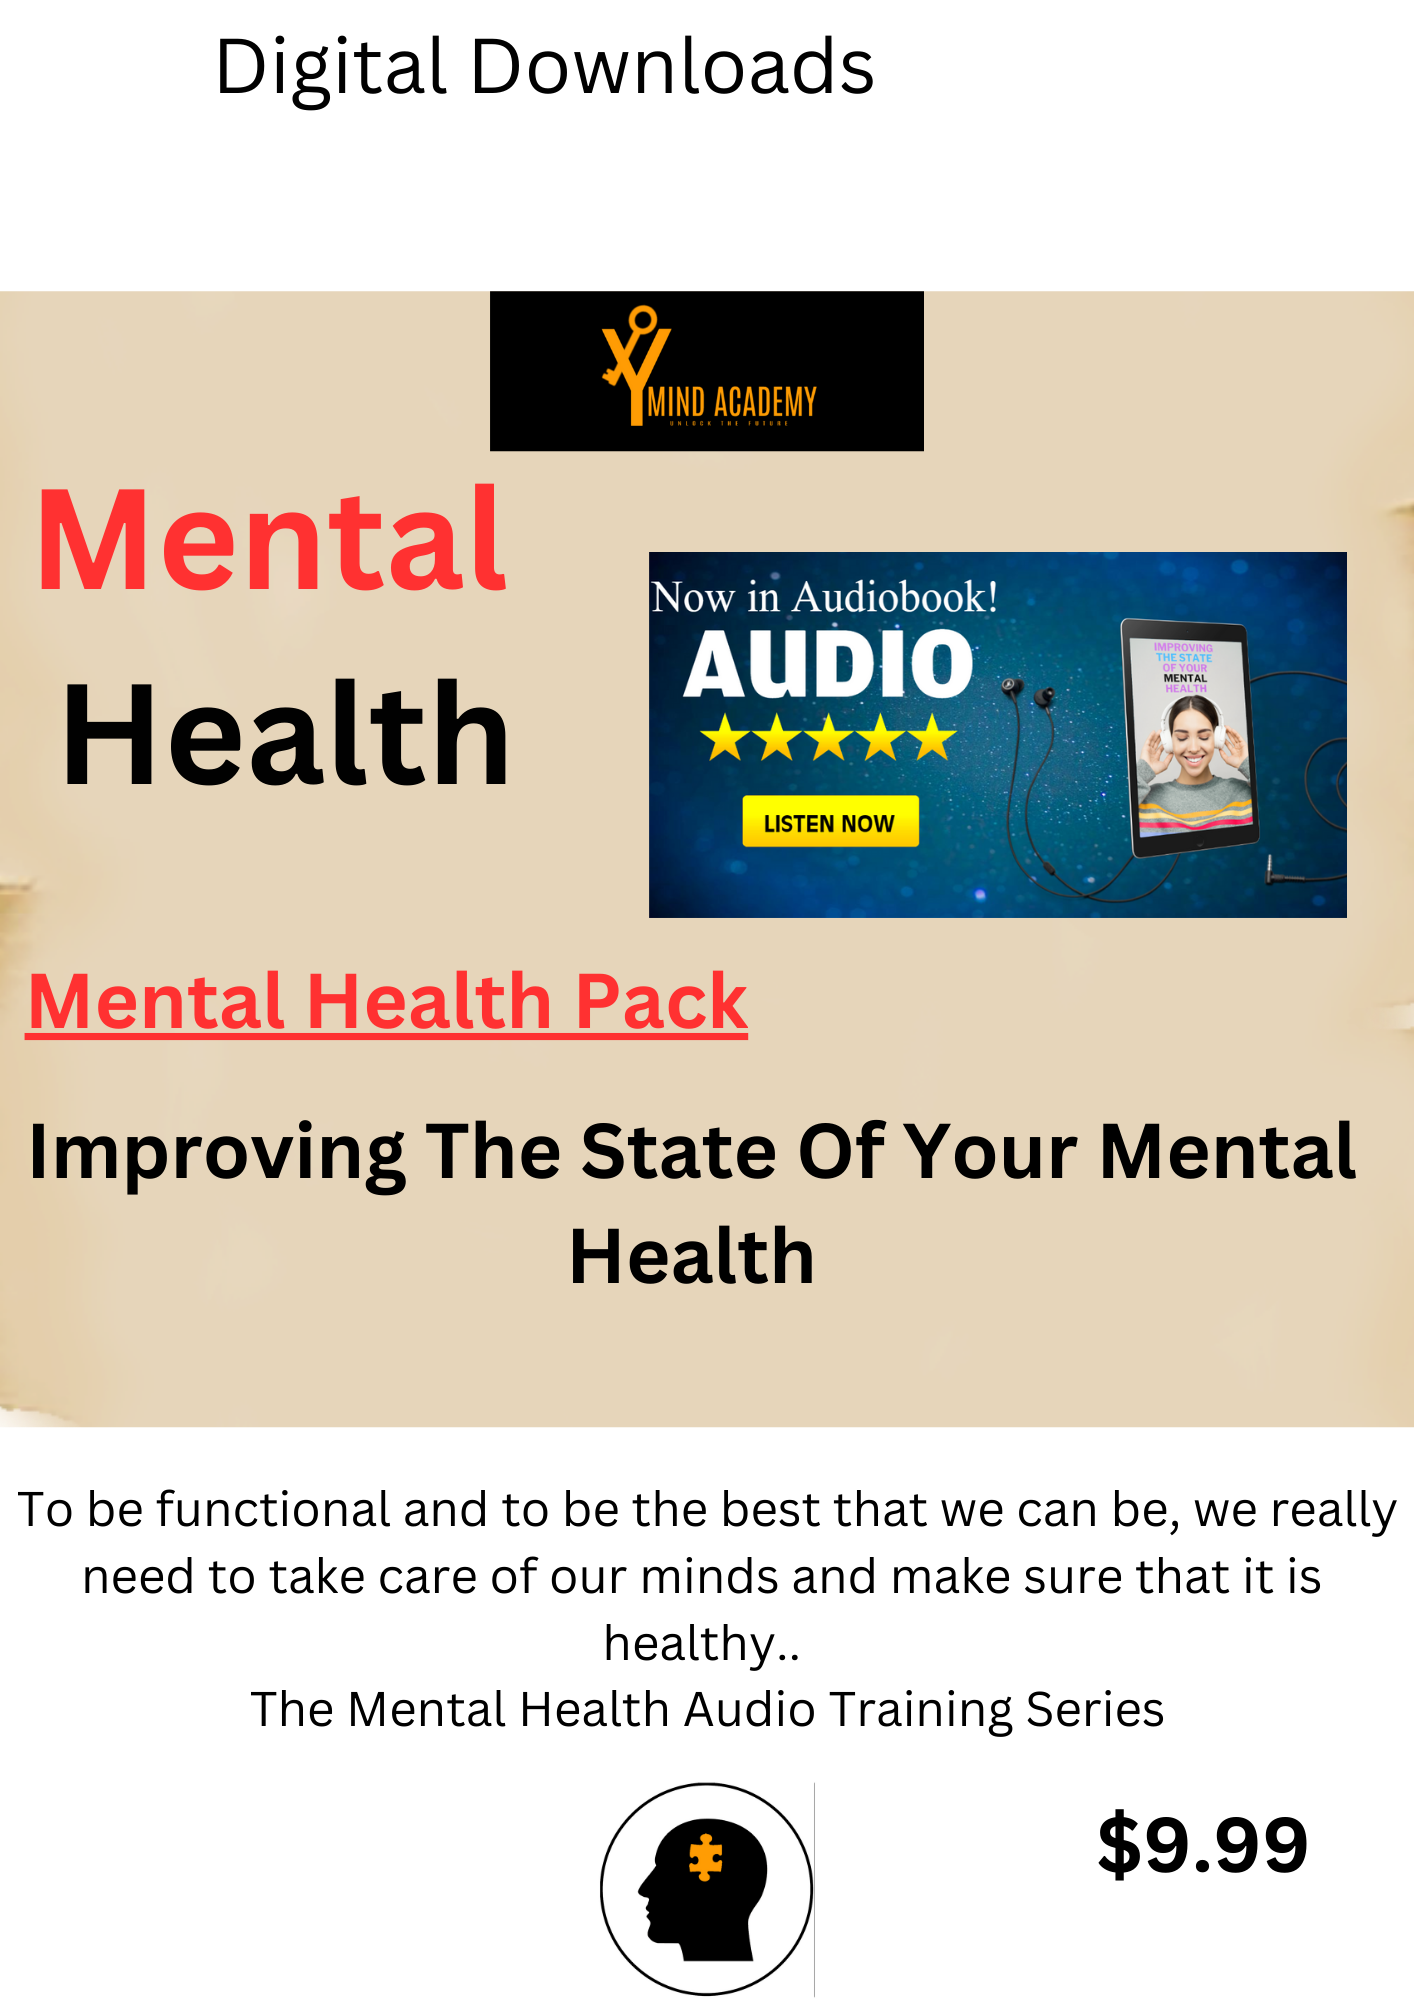 Improving The State Of Your Mental Health